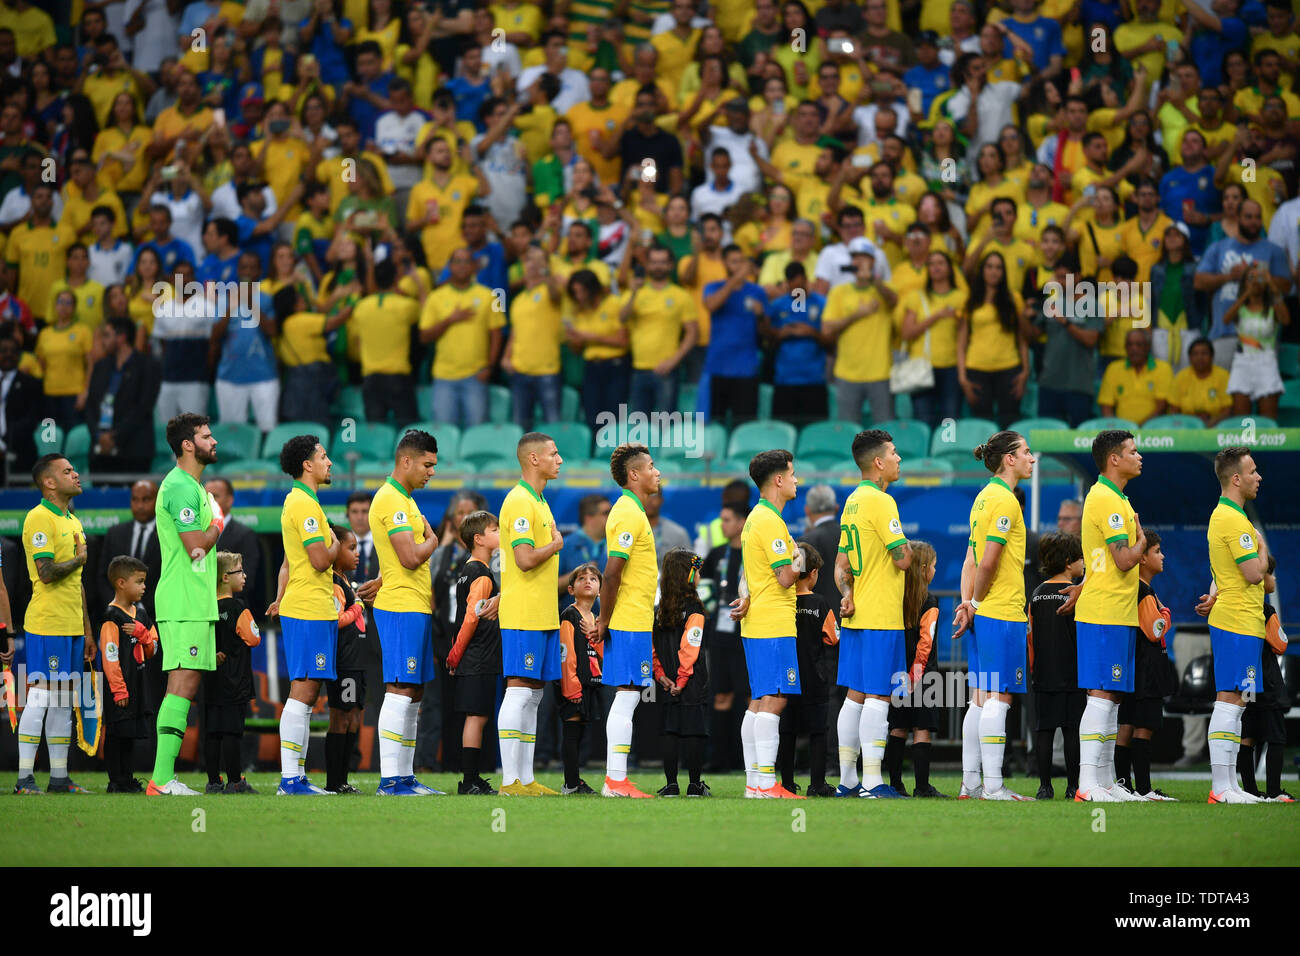 Salvador, Brazil. 18th June, 2019. Brazil's players react before the Group A match between Brazil and Venezuela at the Copa America 2019 in Salvador, Brazil, June 18, 2019.The match ended with 0-0. Credit: Xin Yuewei/Xinhua/Alamy Live News Stock Photo